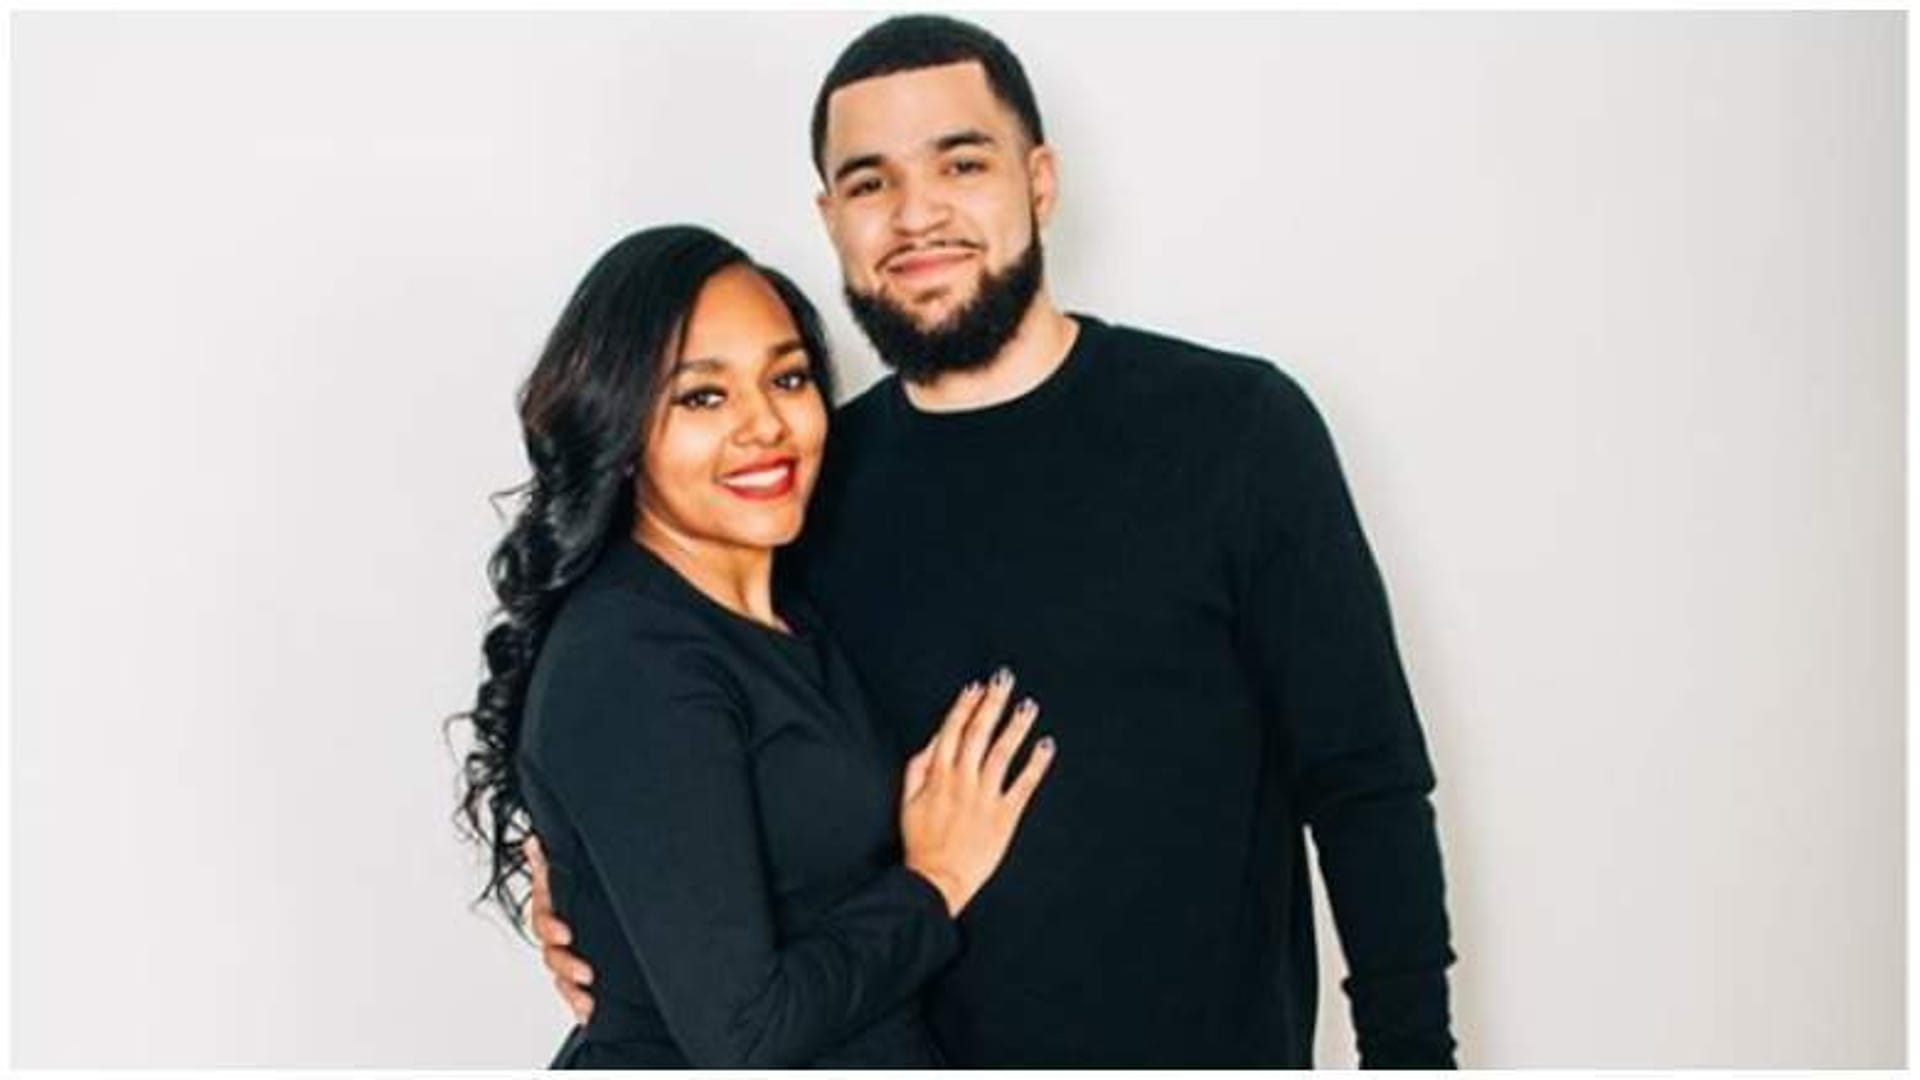 Image of Fred VanVleet with his partner, Shontai Neal